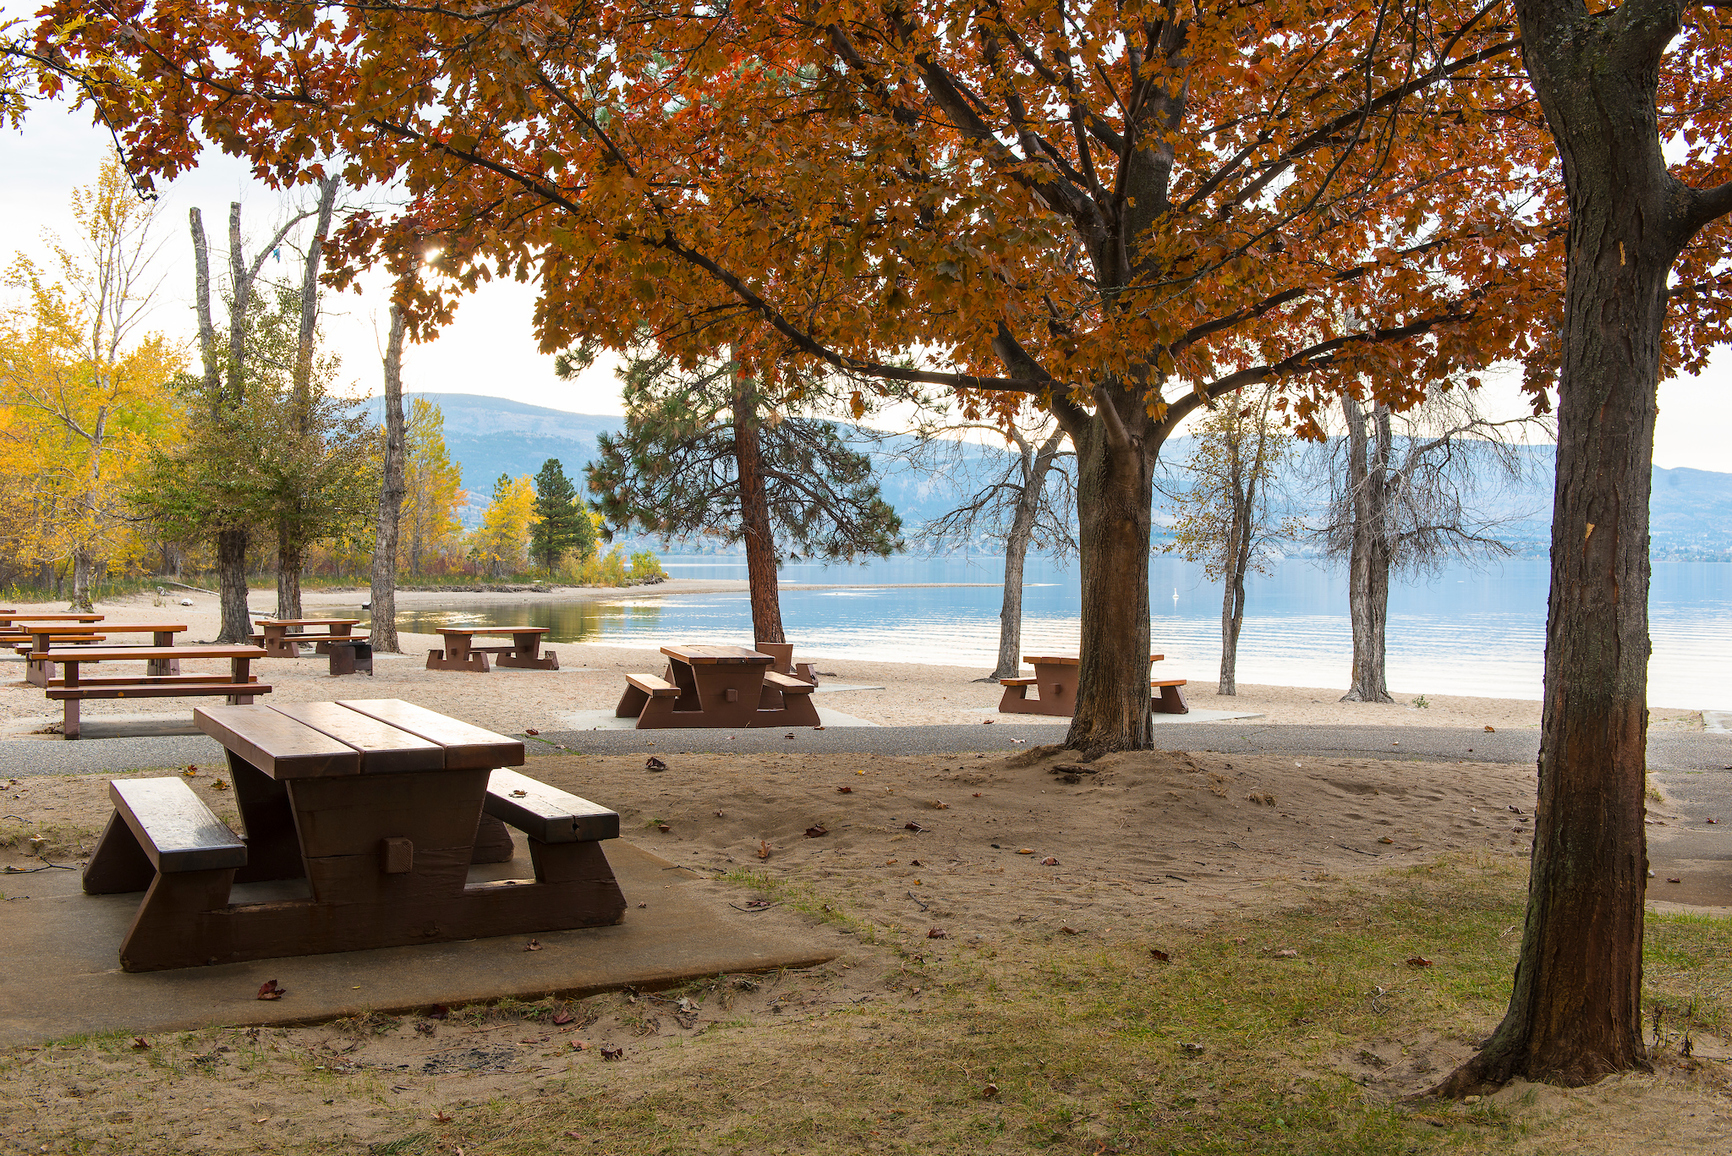 Vacant day use beach area with picnic tables and changing colour deciduous trees.